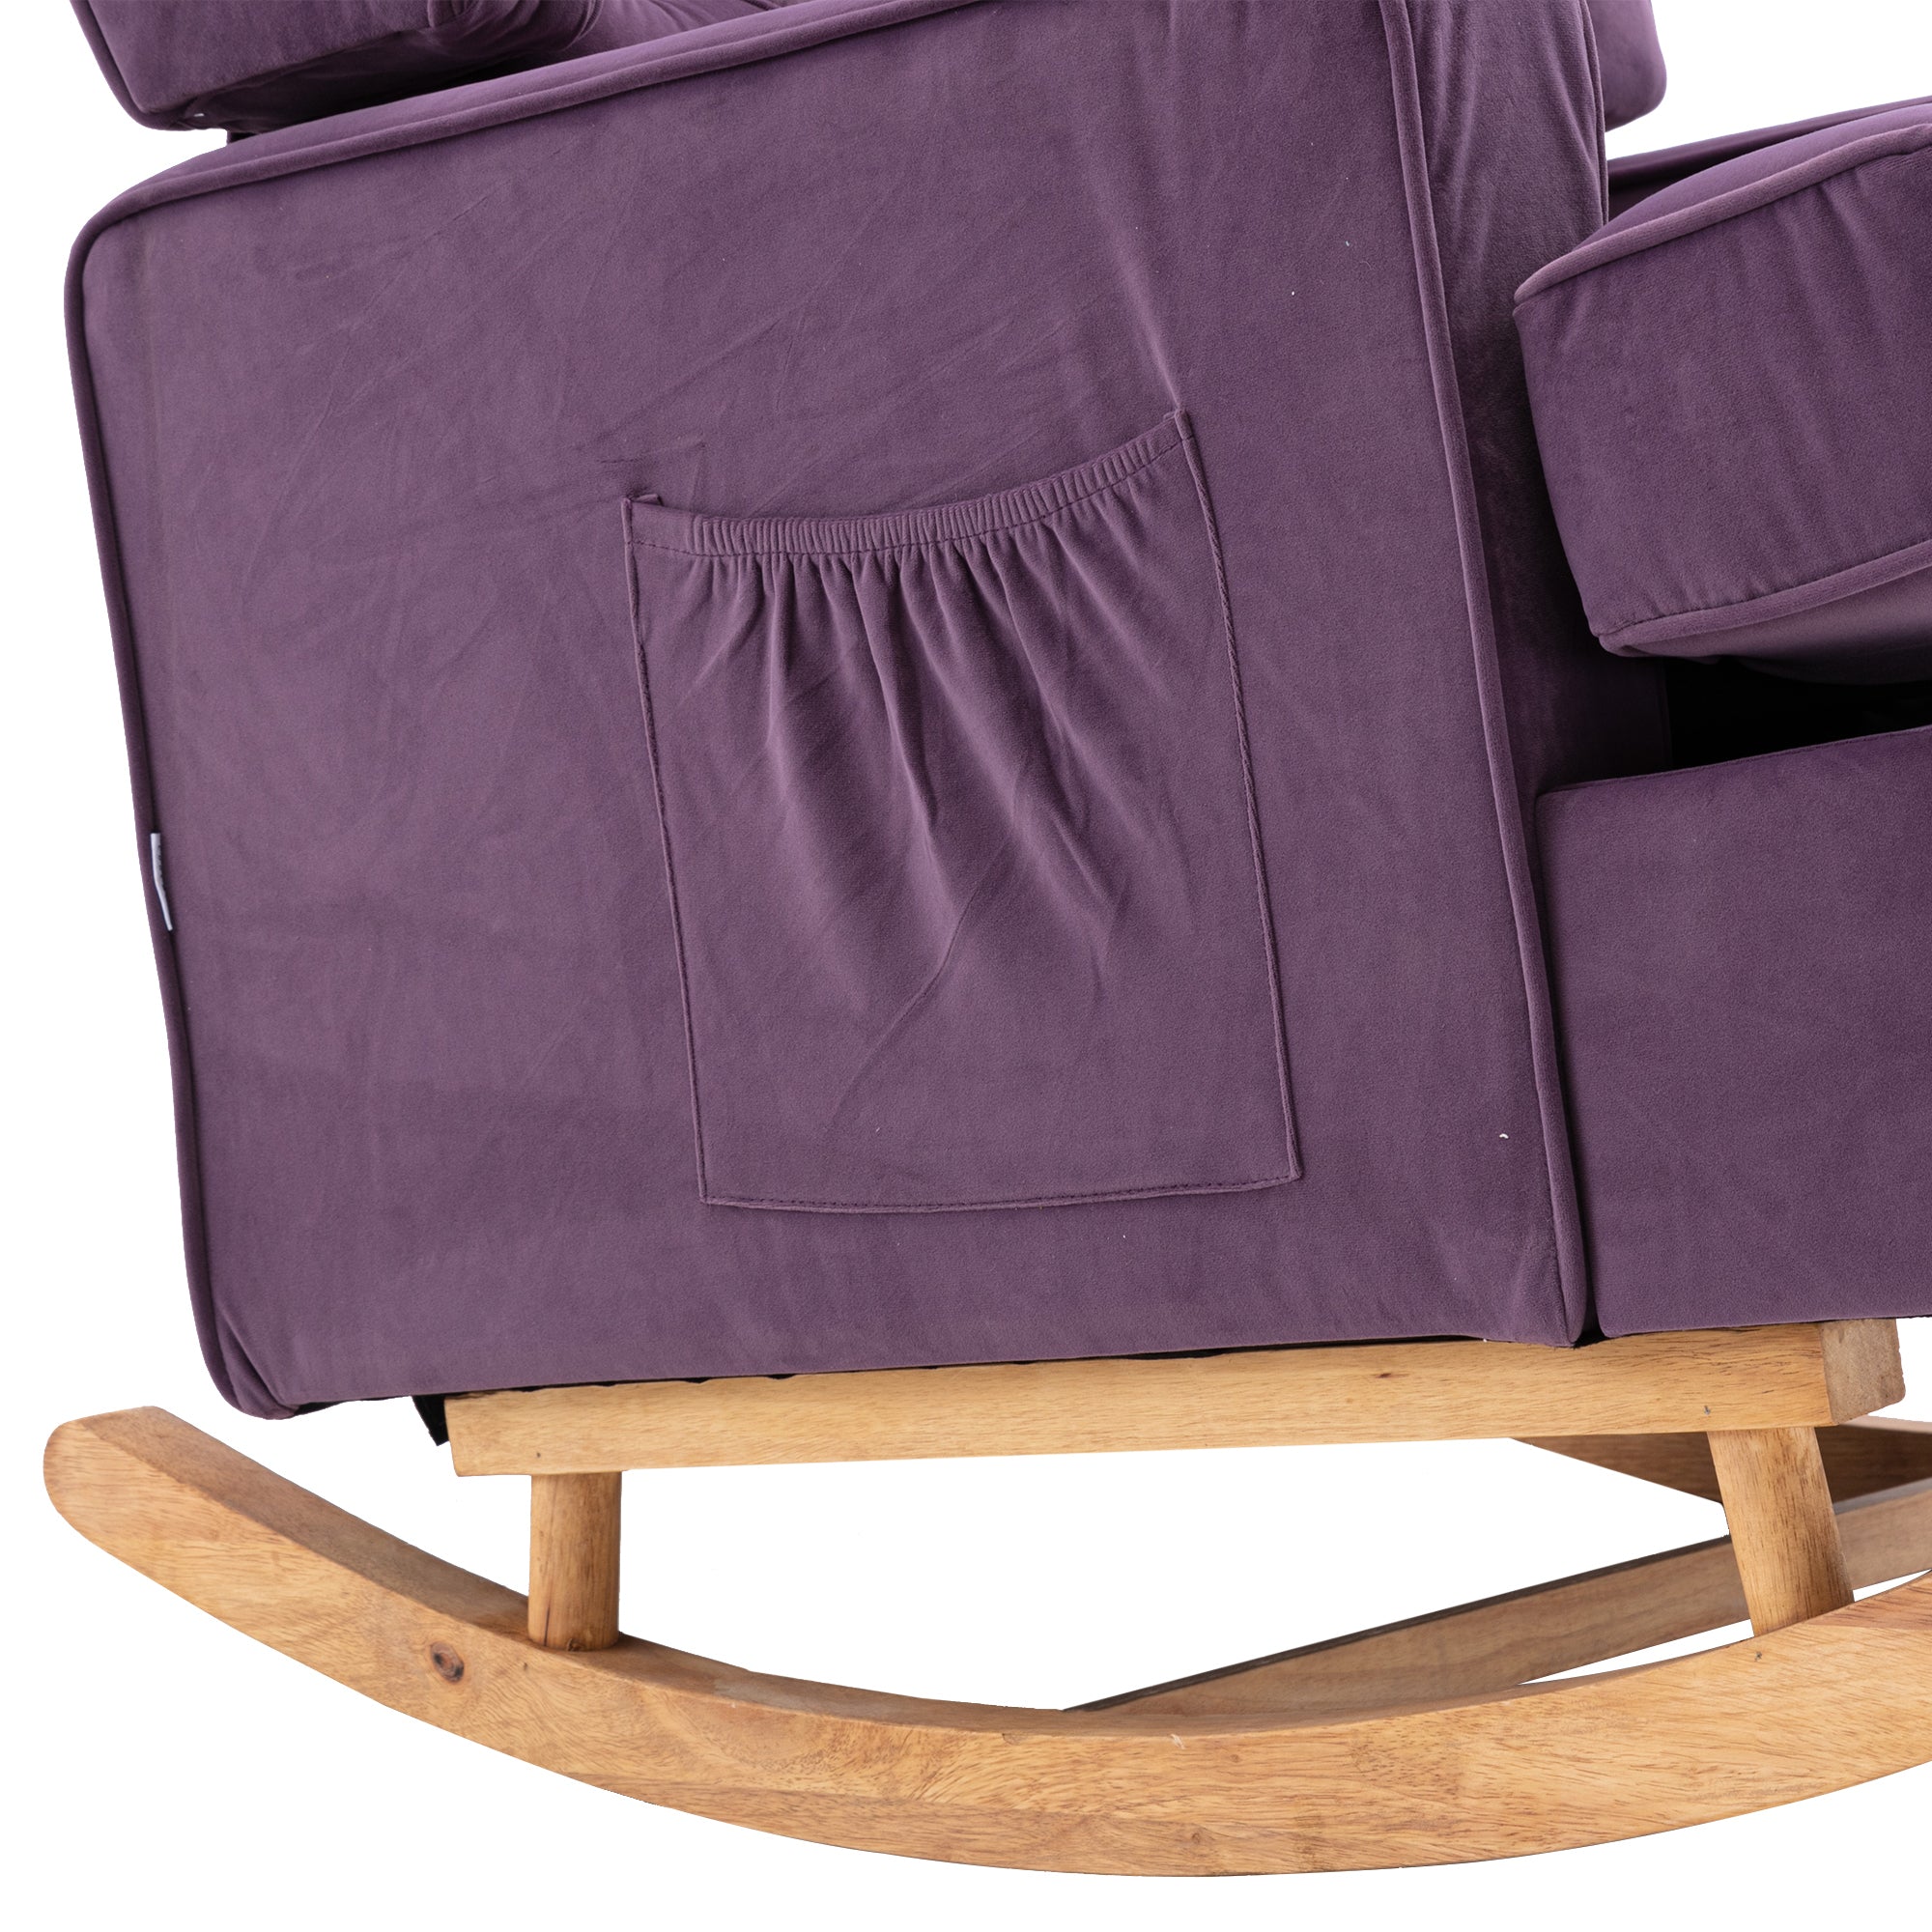 30.7"W Comfortable Rocking Chair with Natural Solid Rubber Wood Legs, Purple